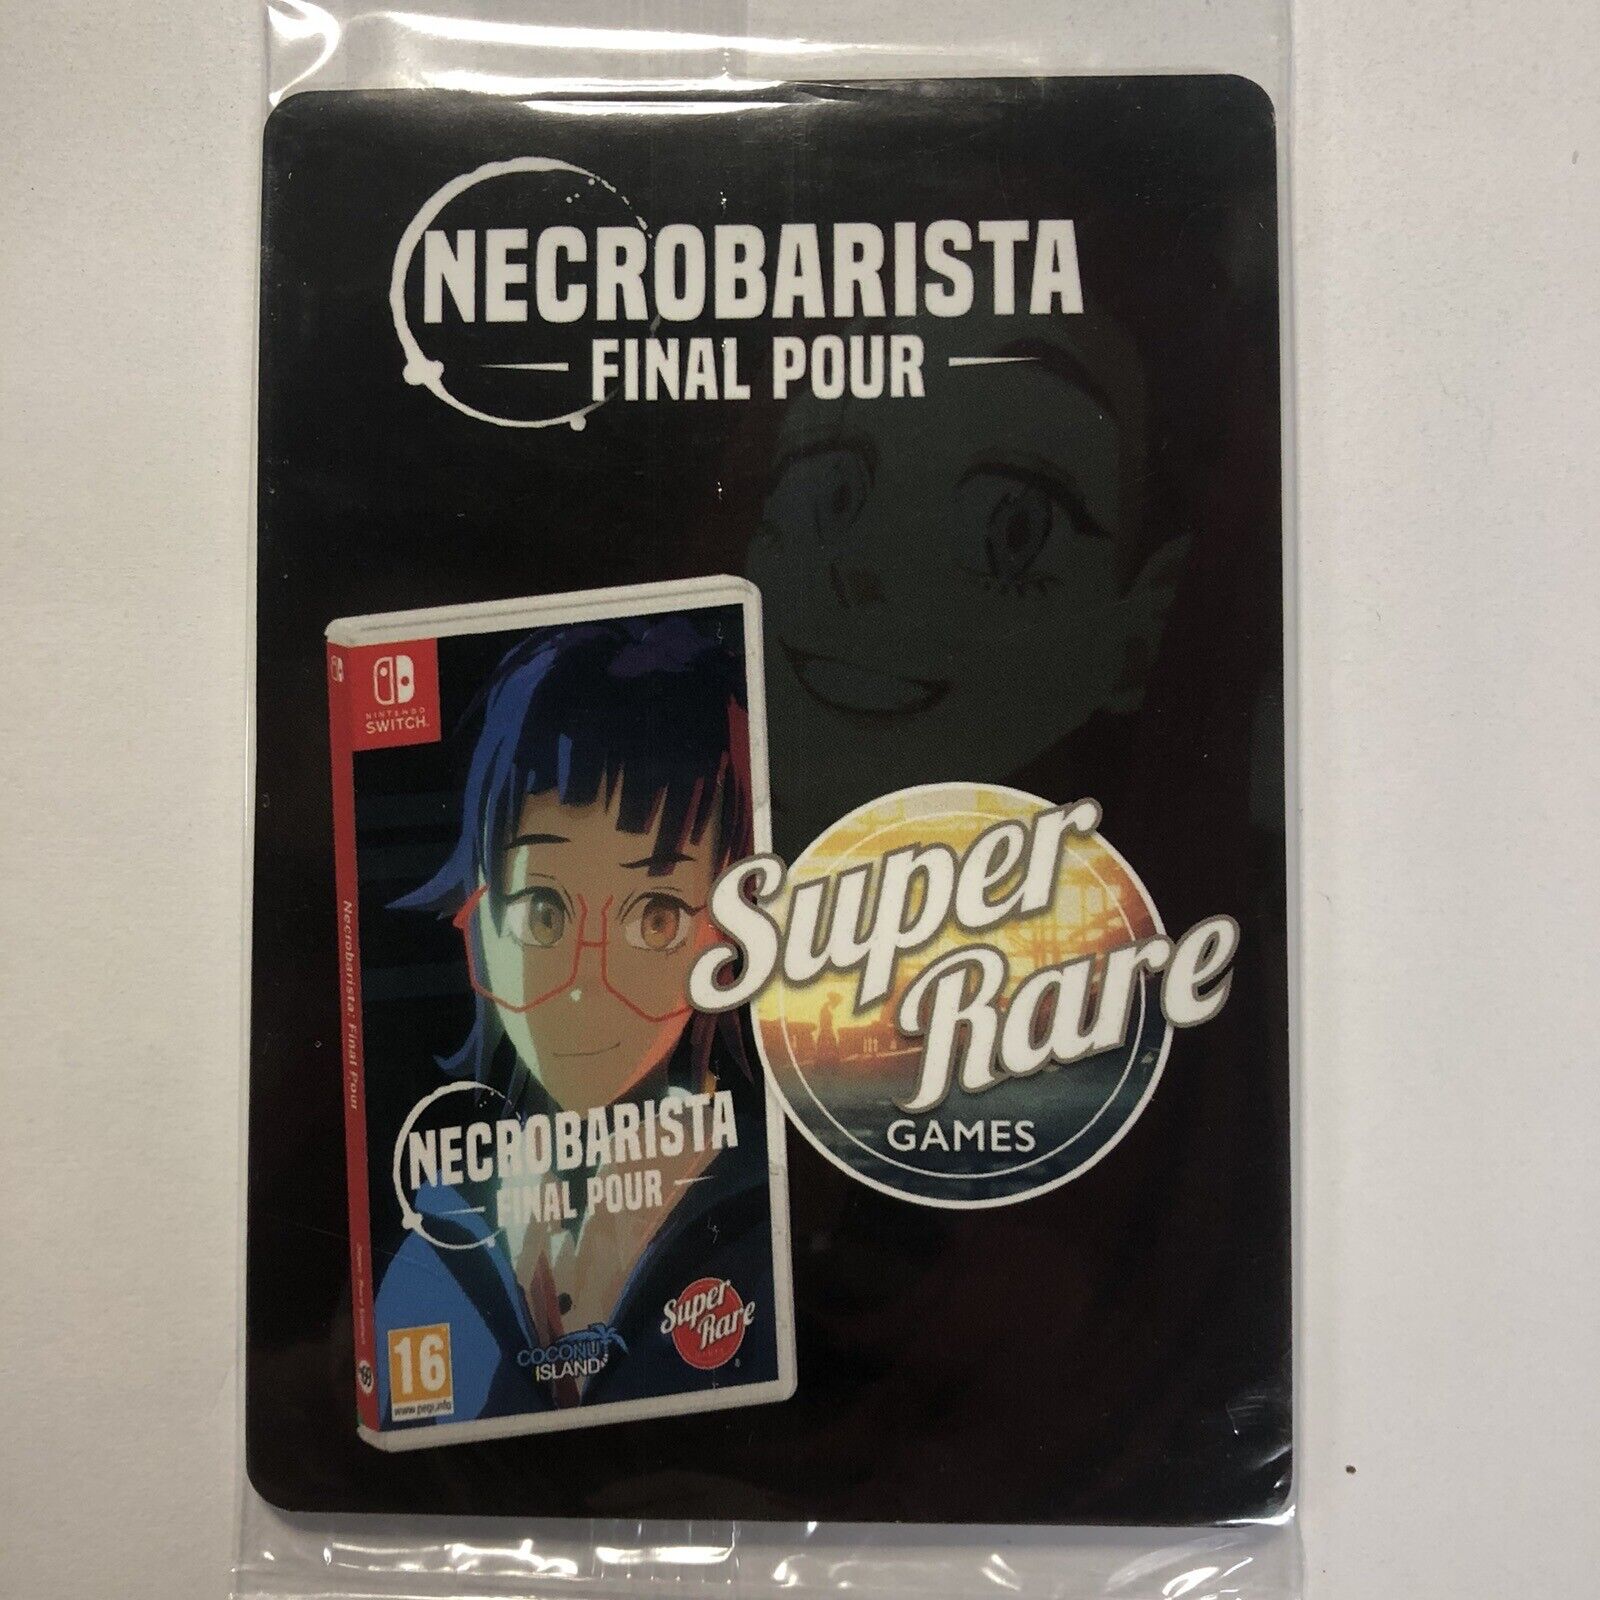 Necrobarista Final Pour Sealed 4 Trading Card Pack Super Rare Games SRG